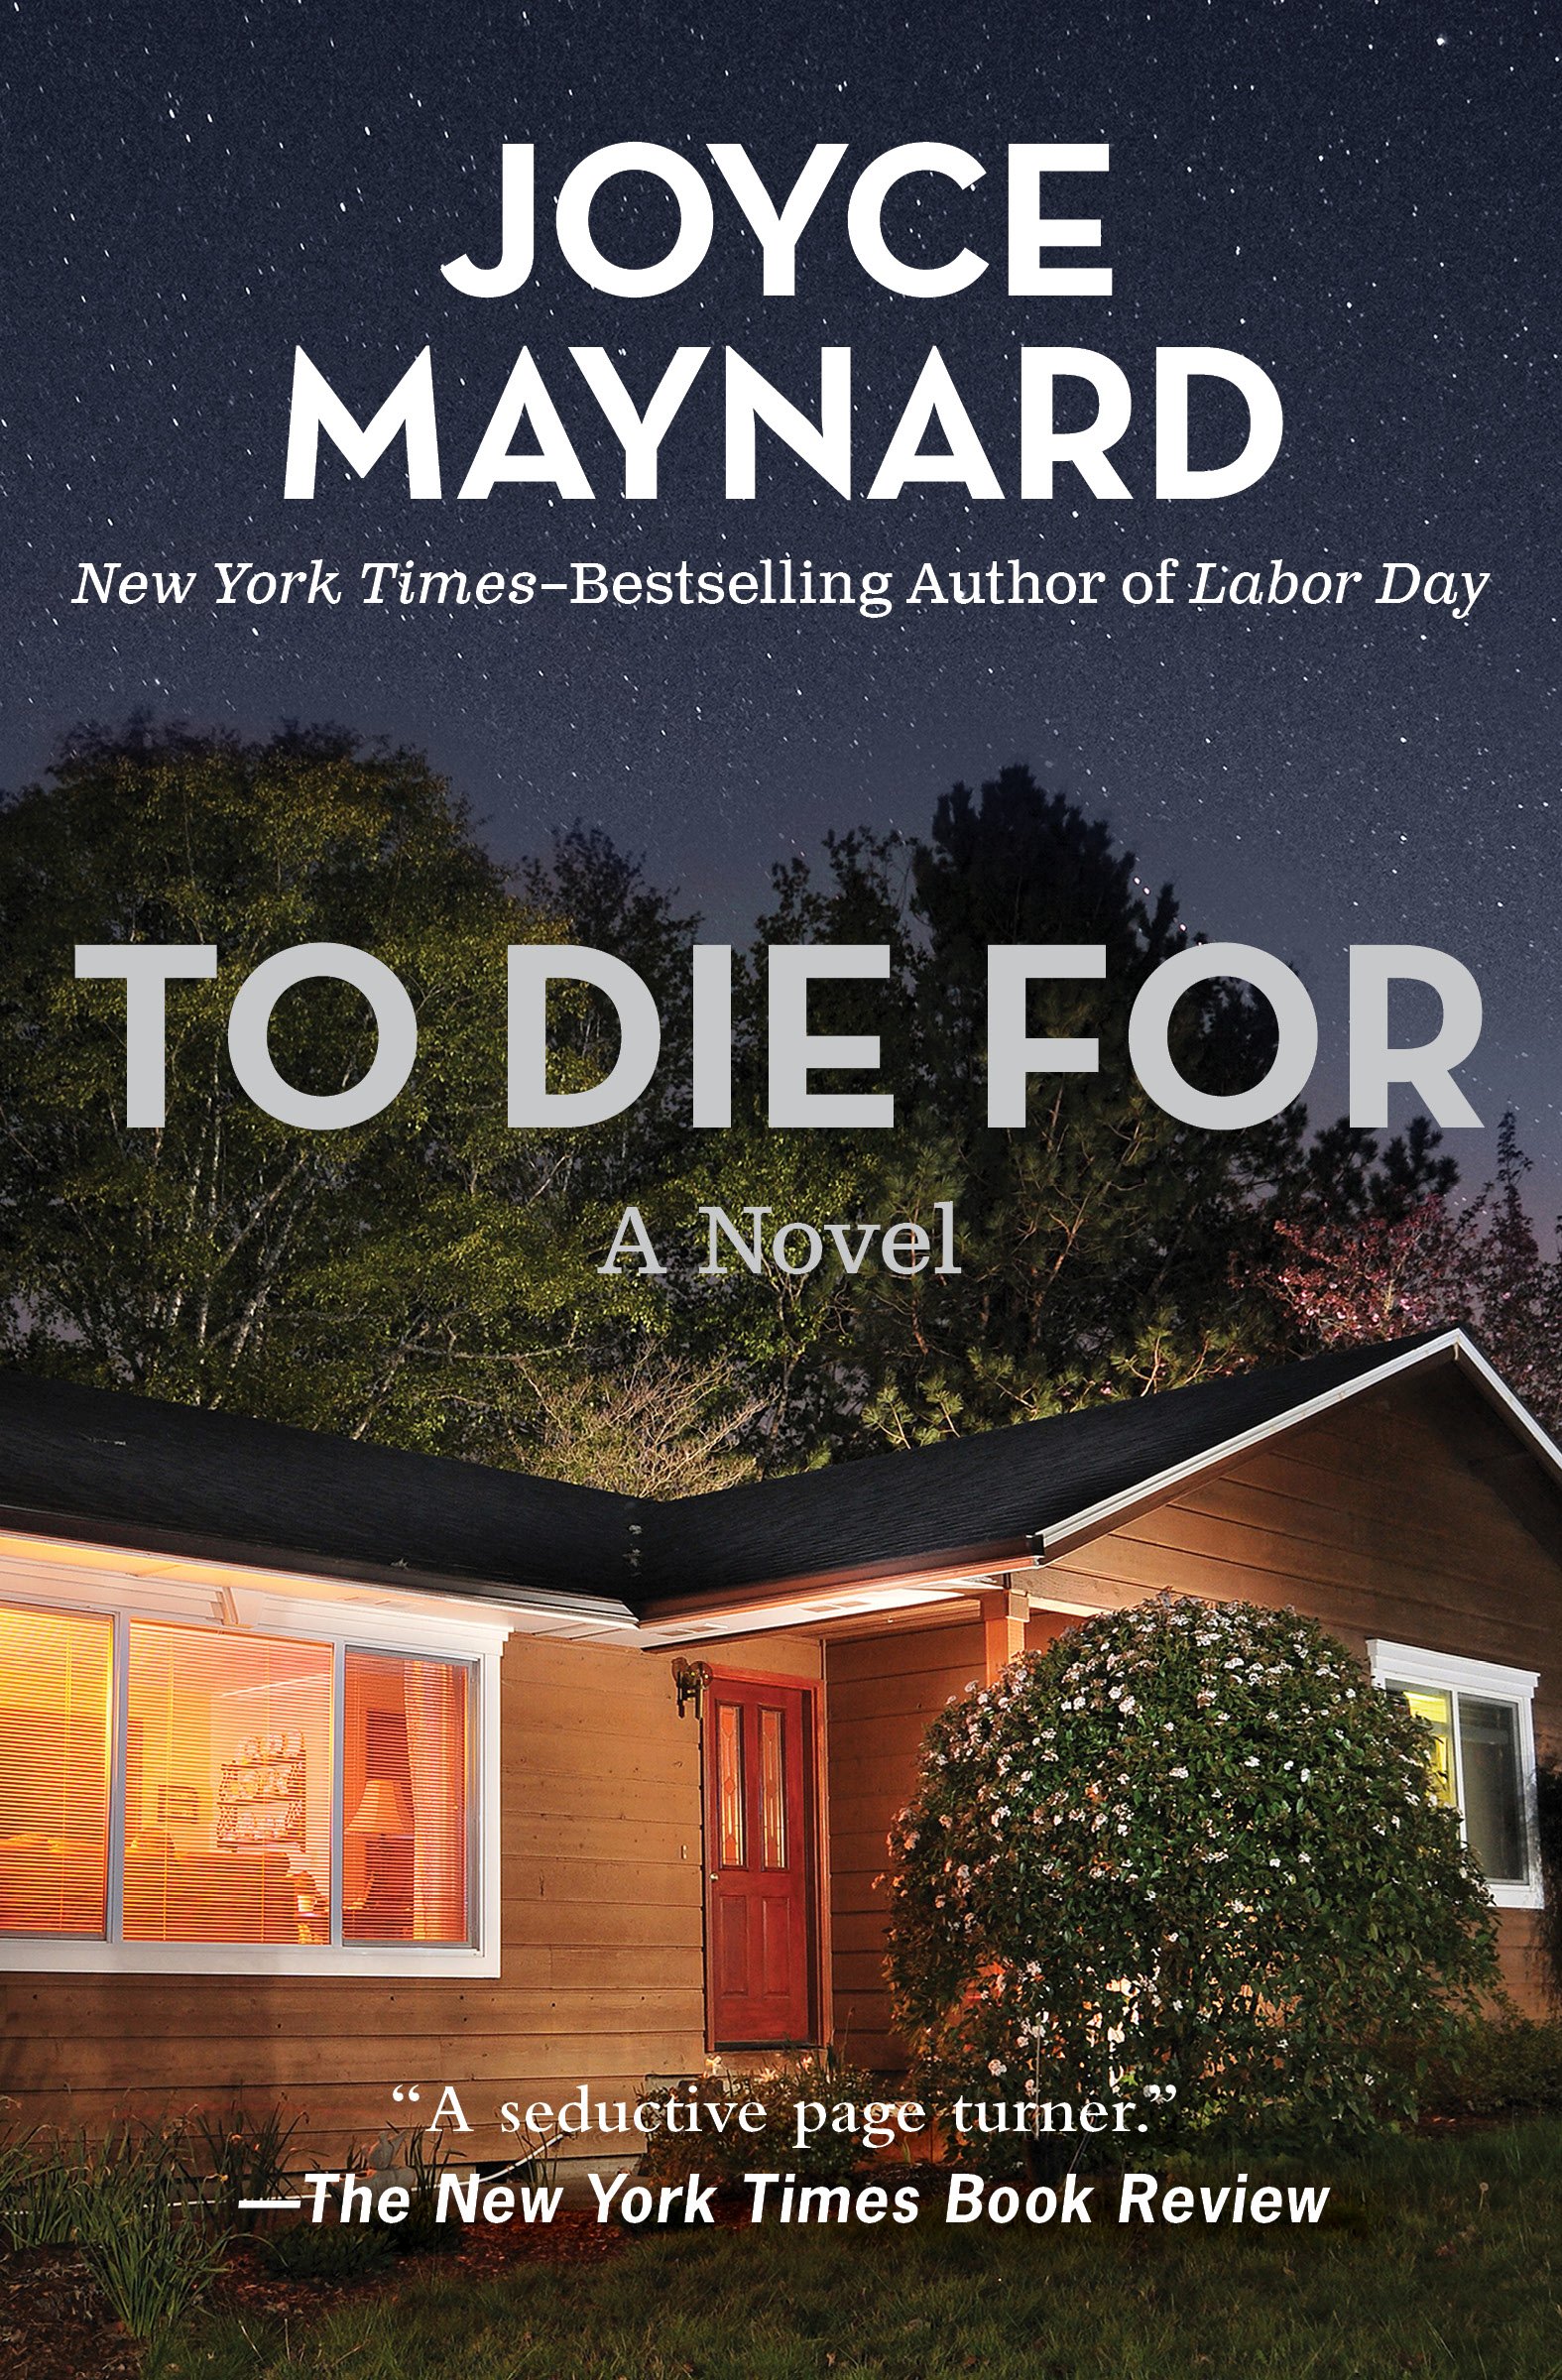 Night falls on a quaint suburban home, its windows glowing with warmth against a backdrop of a starry sky, setting the scene for joyce maynard's suspenseful tale, "to die for.